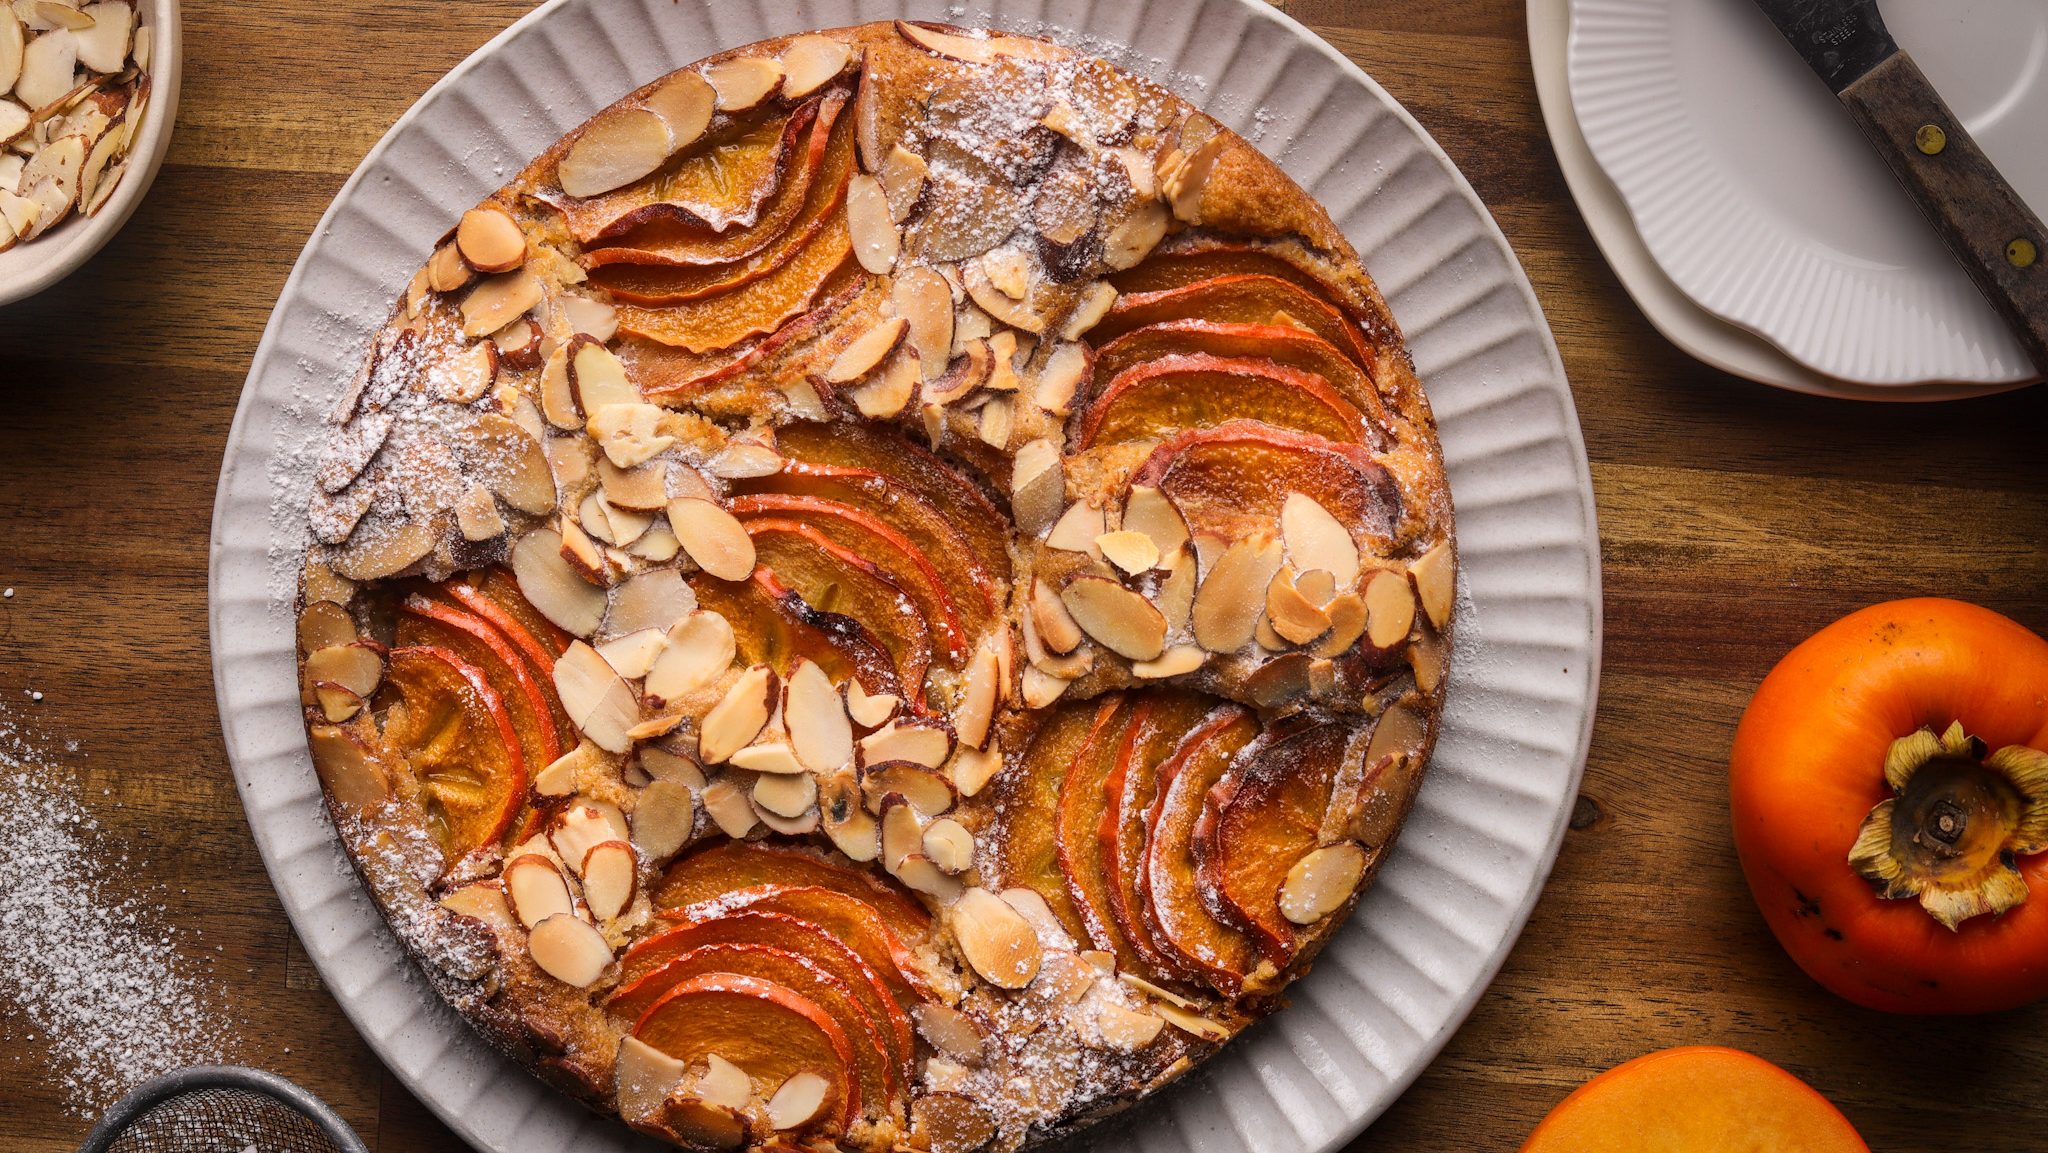 Birdseye veiw of a round cake on a plate with persimmon slices and almonds.